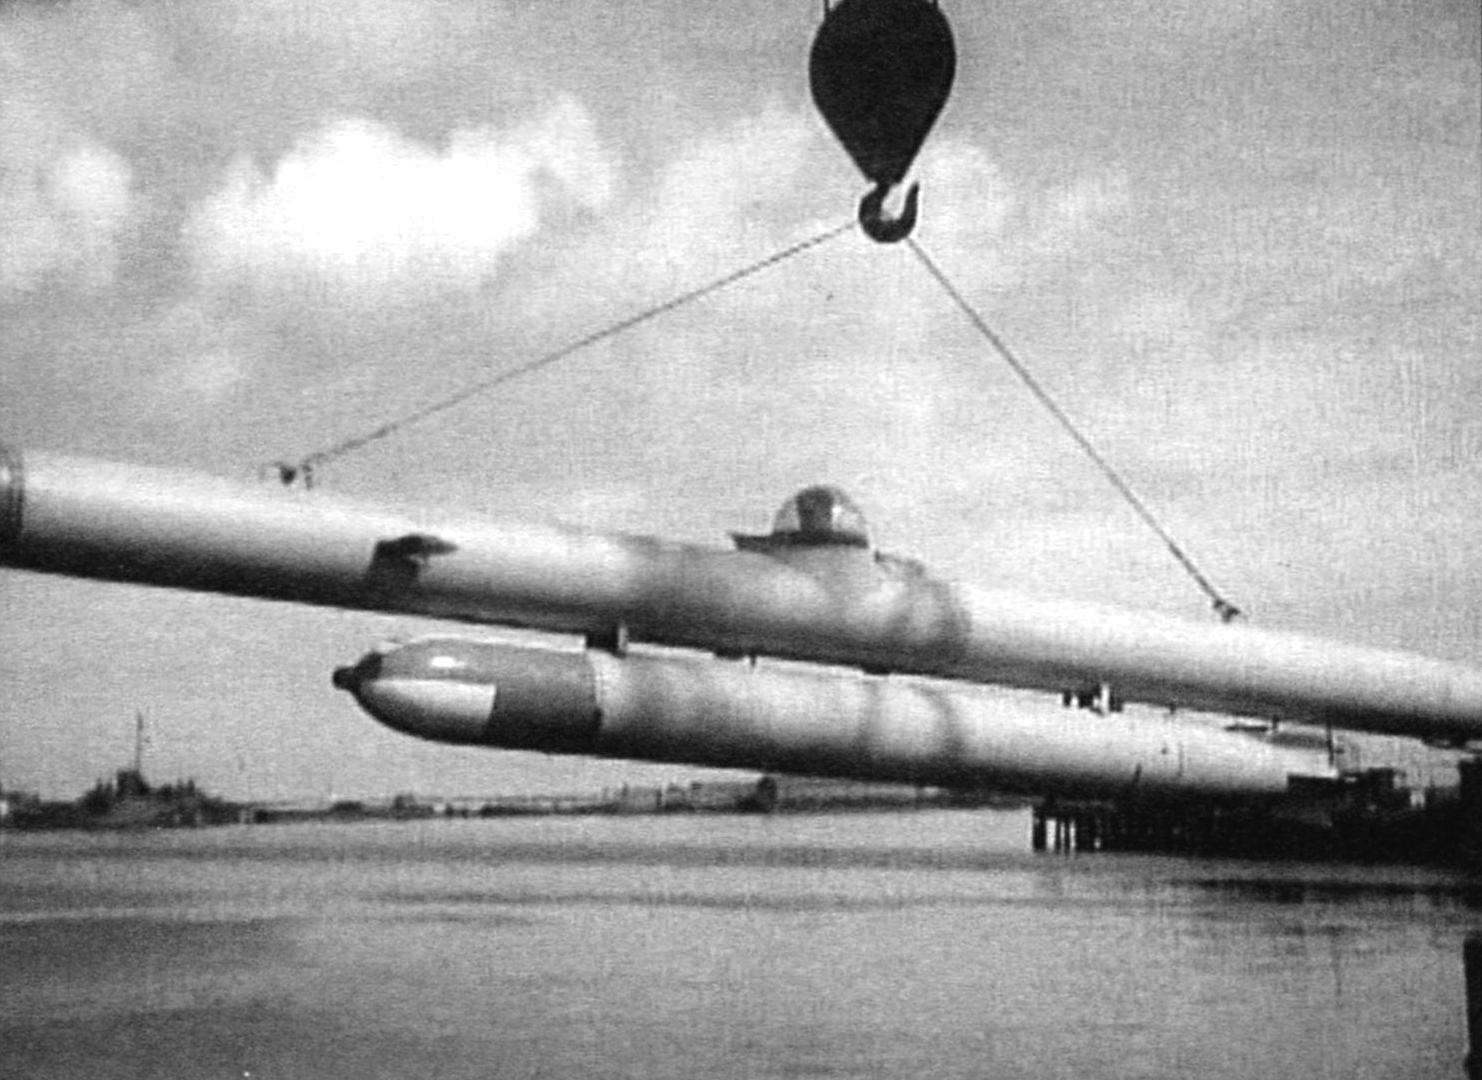 Chelovekovedenija torpedo Hase. The pilot sat in the cockpit, and then the crane lowers the torpedo into the water